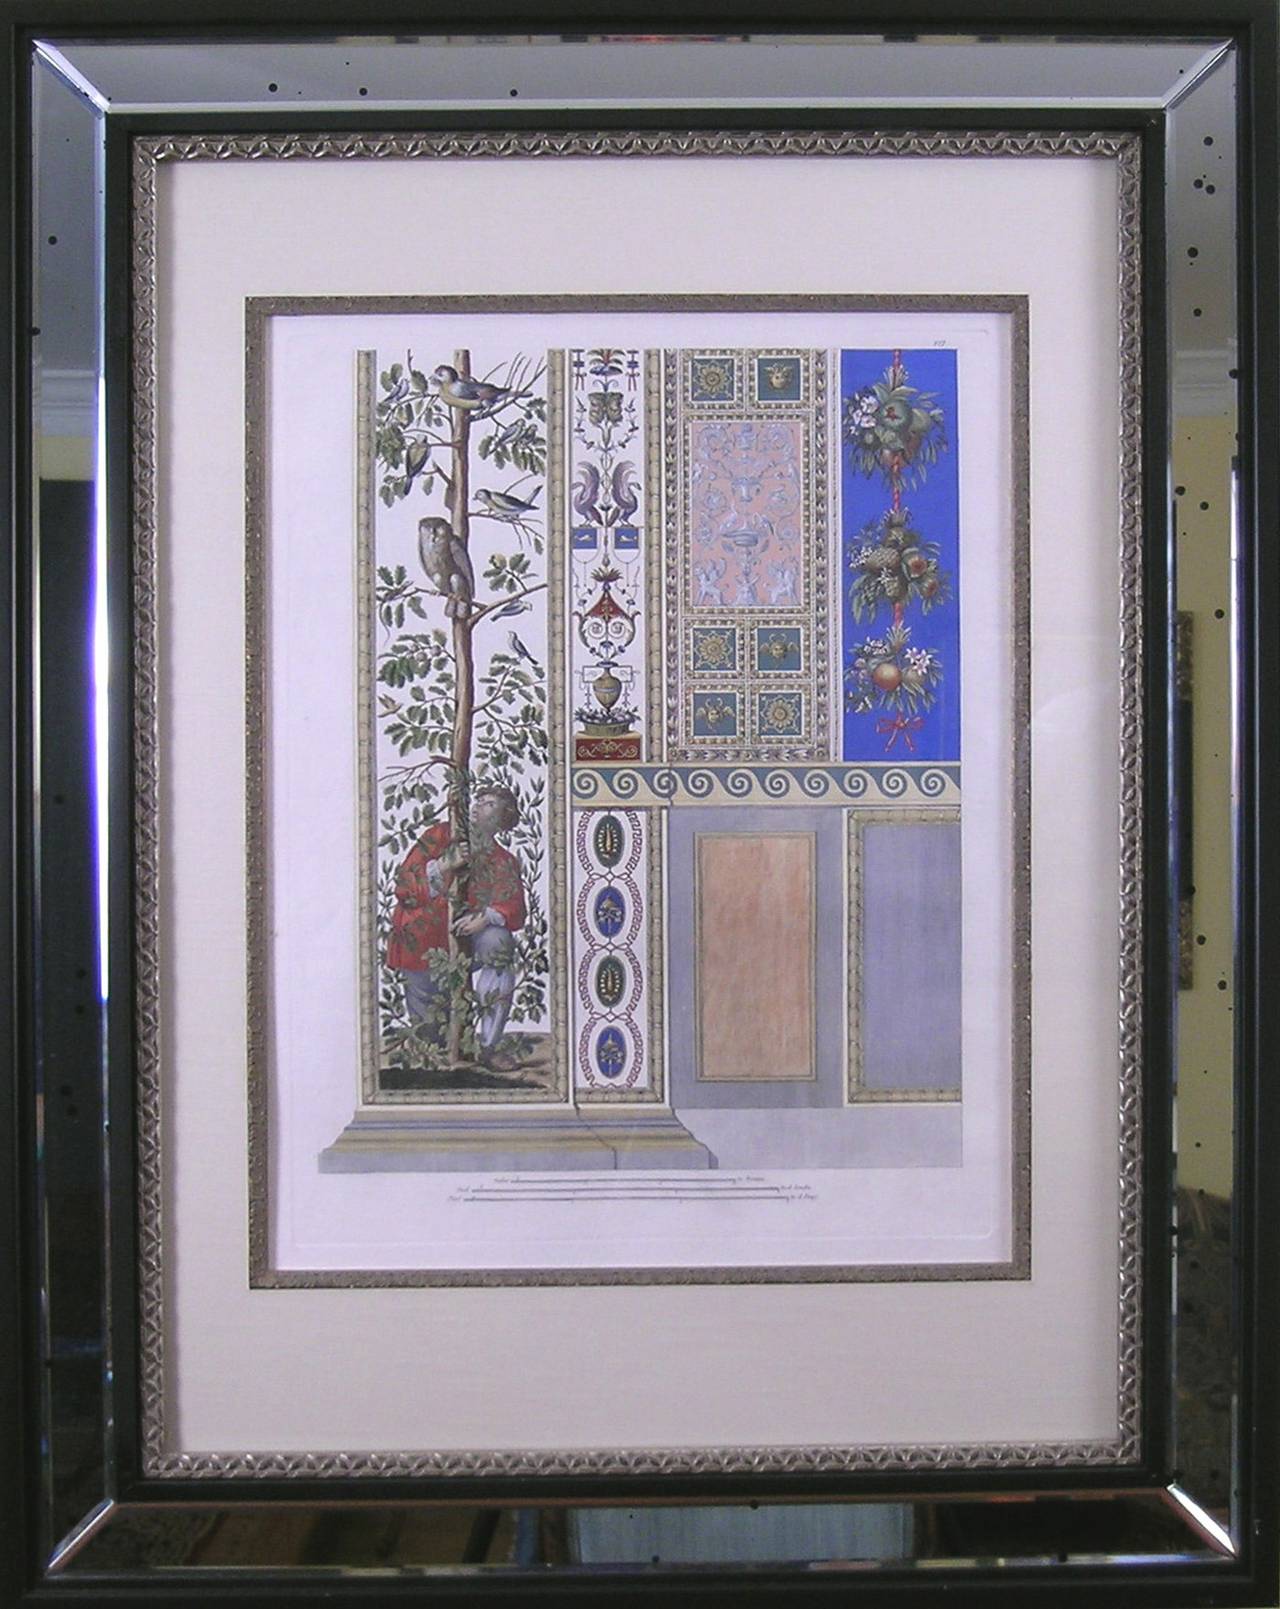 Raphael's Loggia  Plate VII.  Pilaster Bottom Priced as a pair with Pilaster Top - Print by Gaetano Savorelli